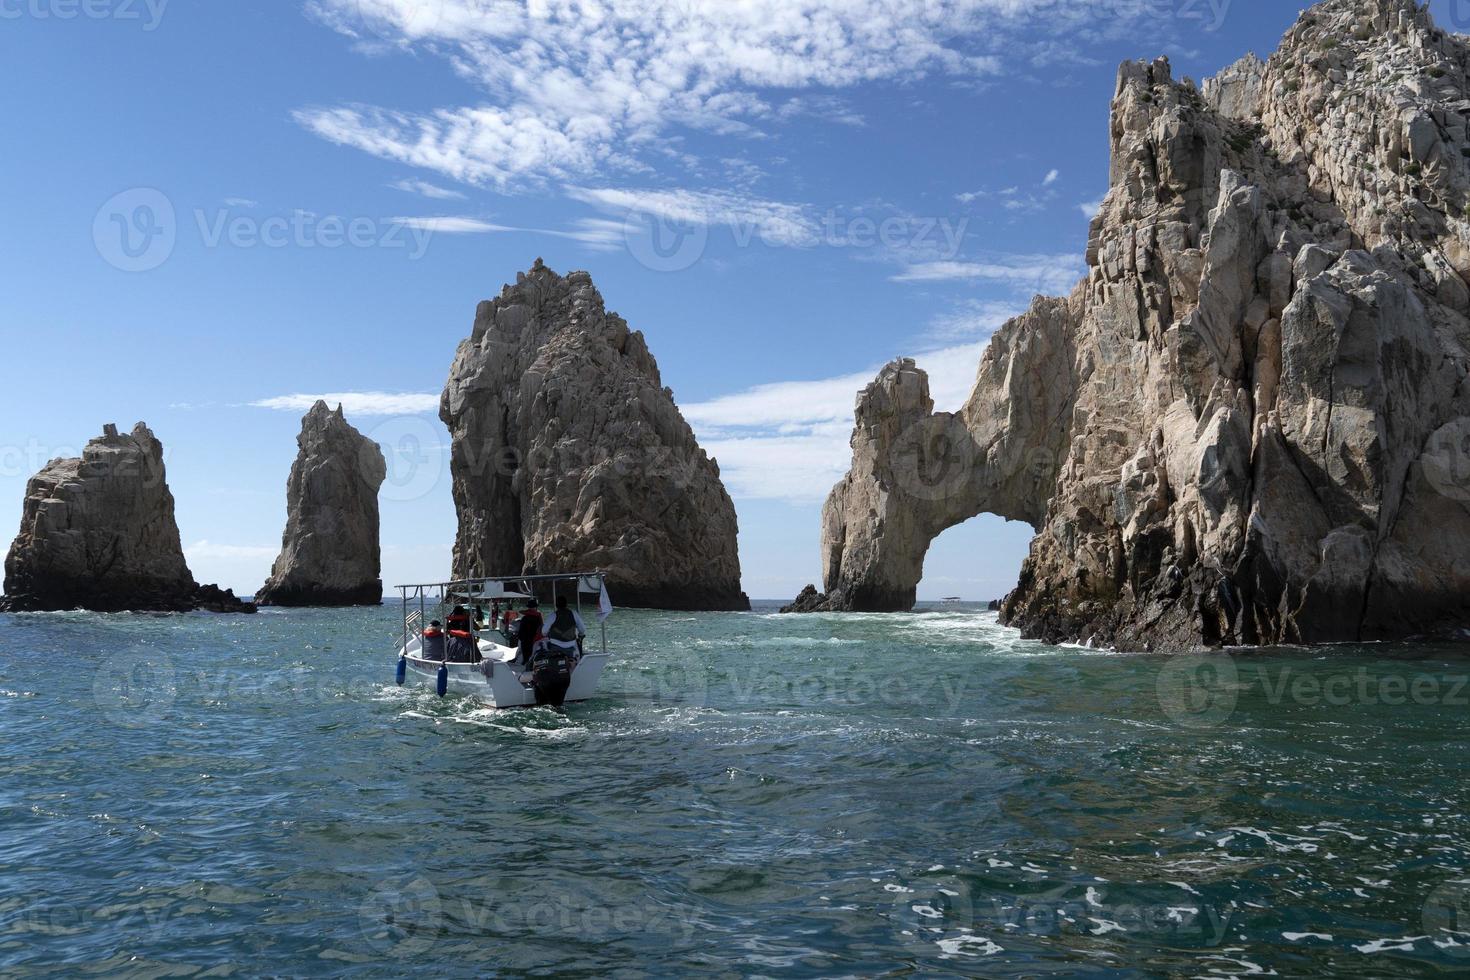 CABO SAN LUCAS, MEXICO - FEBRUARY 1 2019 - Tourist in water activities photo